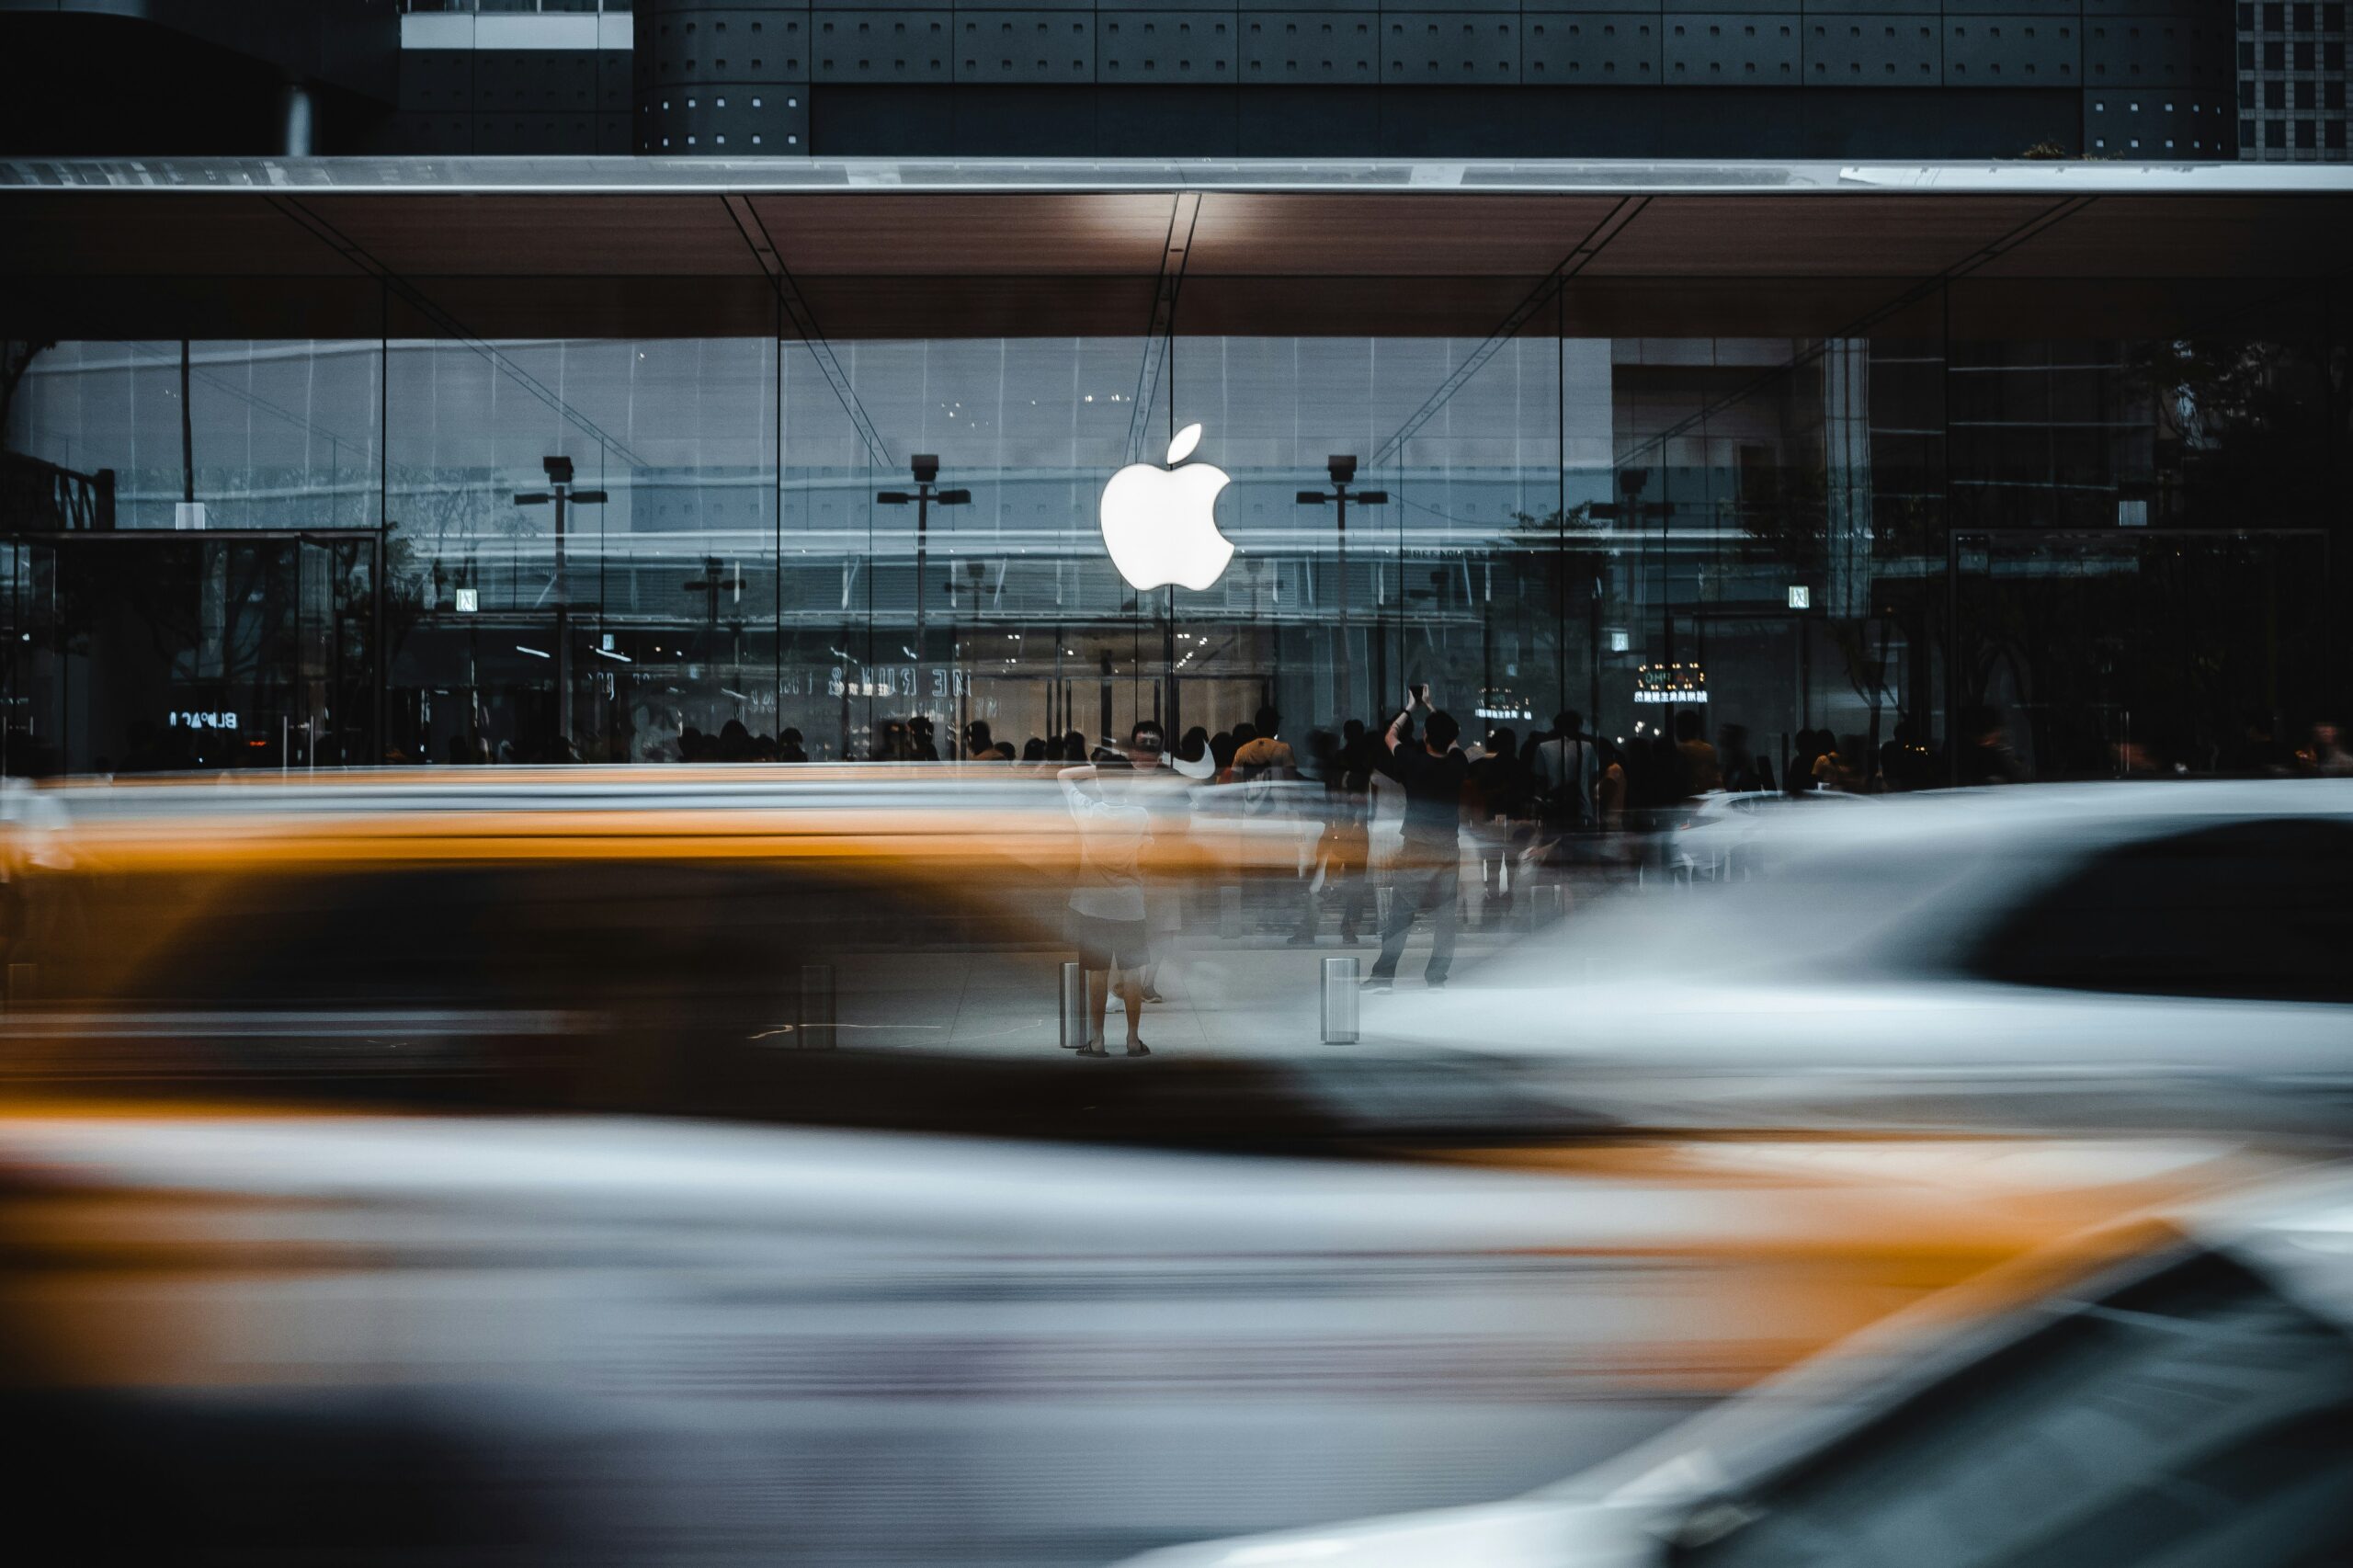 Explore how the iPhone enters a new era with Apple's rumored deal with Samsung. Learn about the potential collaboration and its impact.